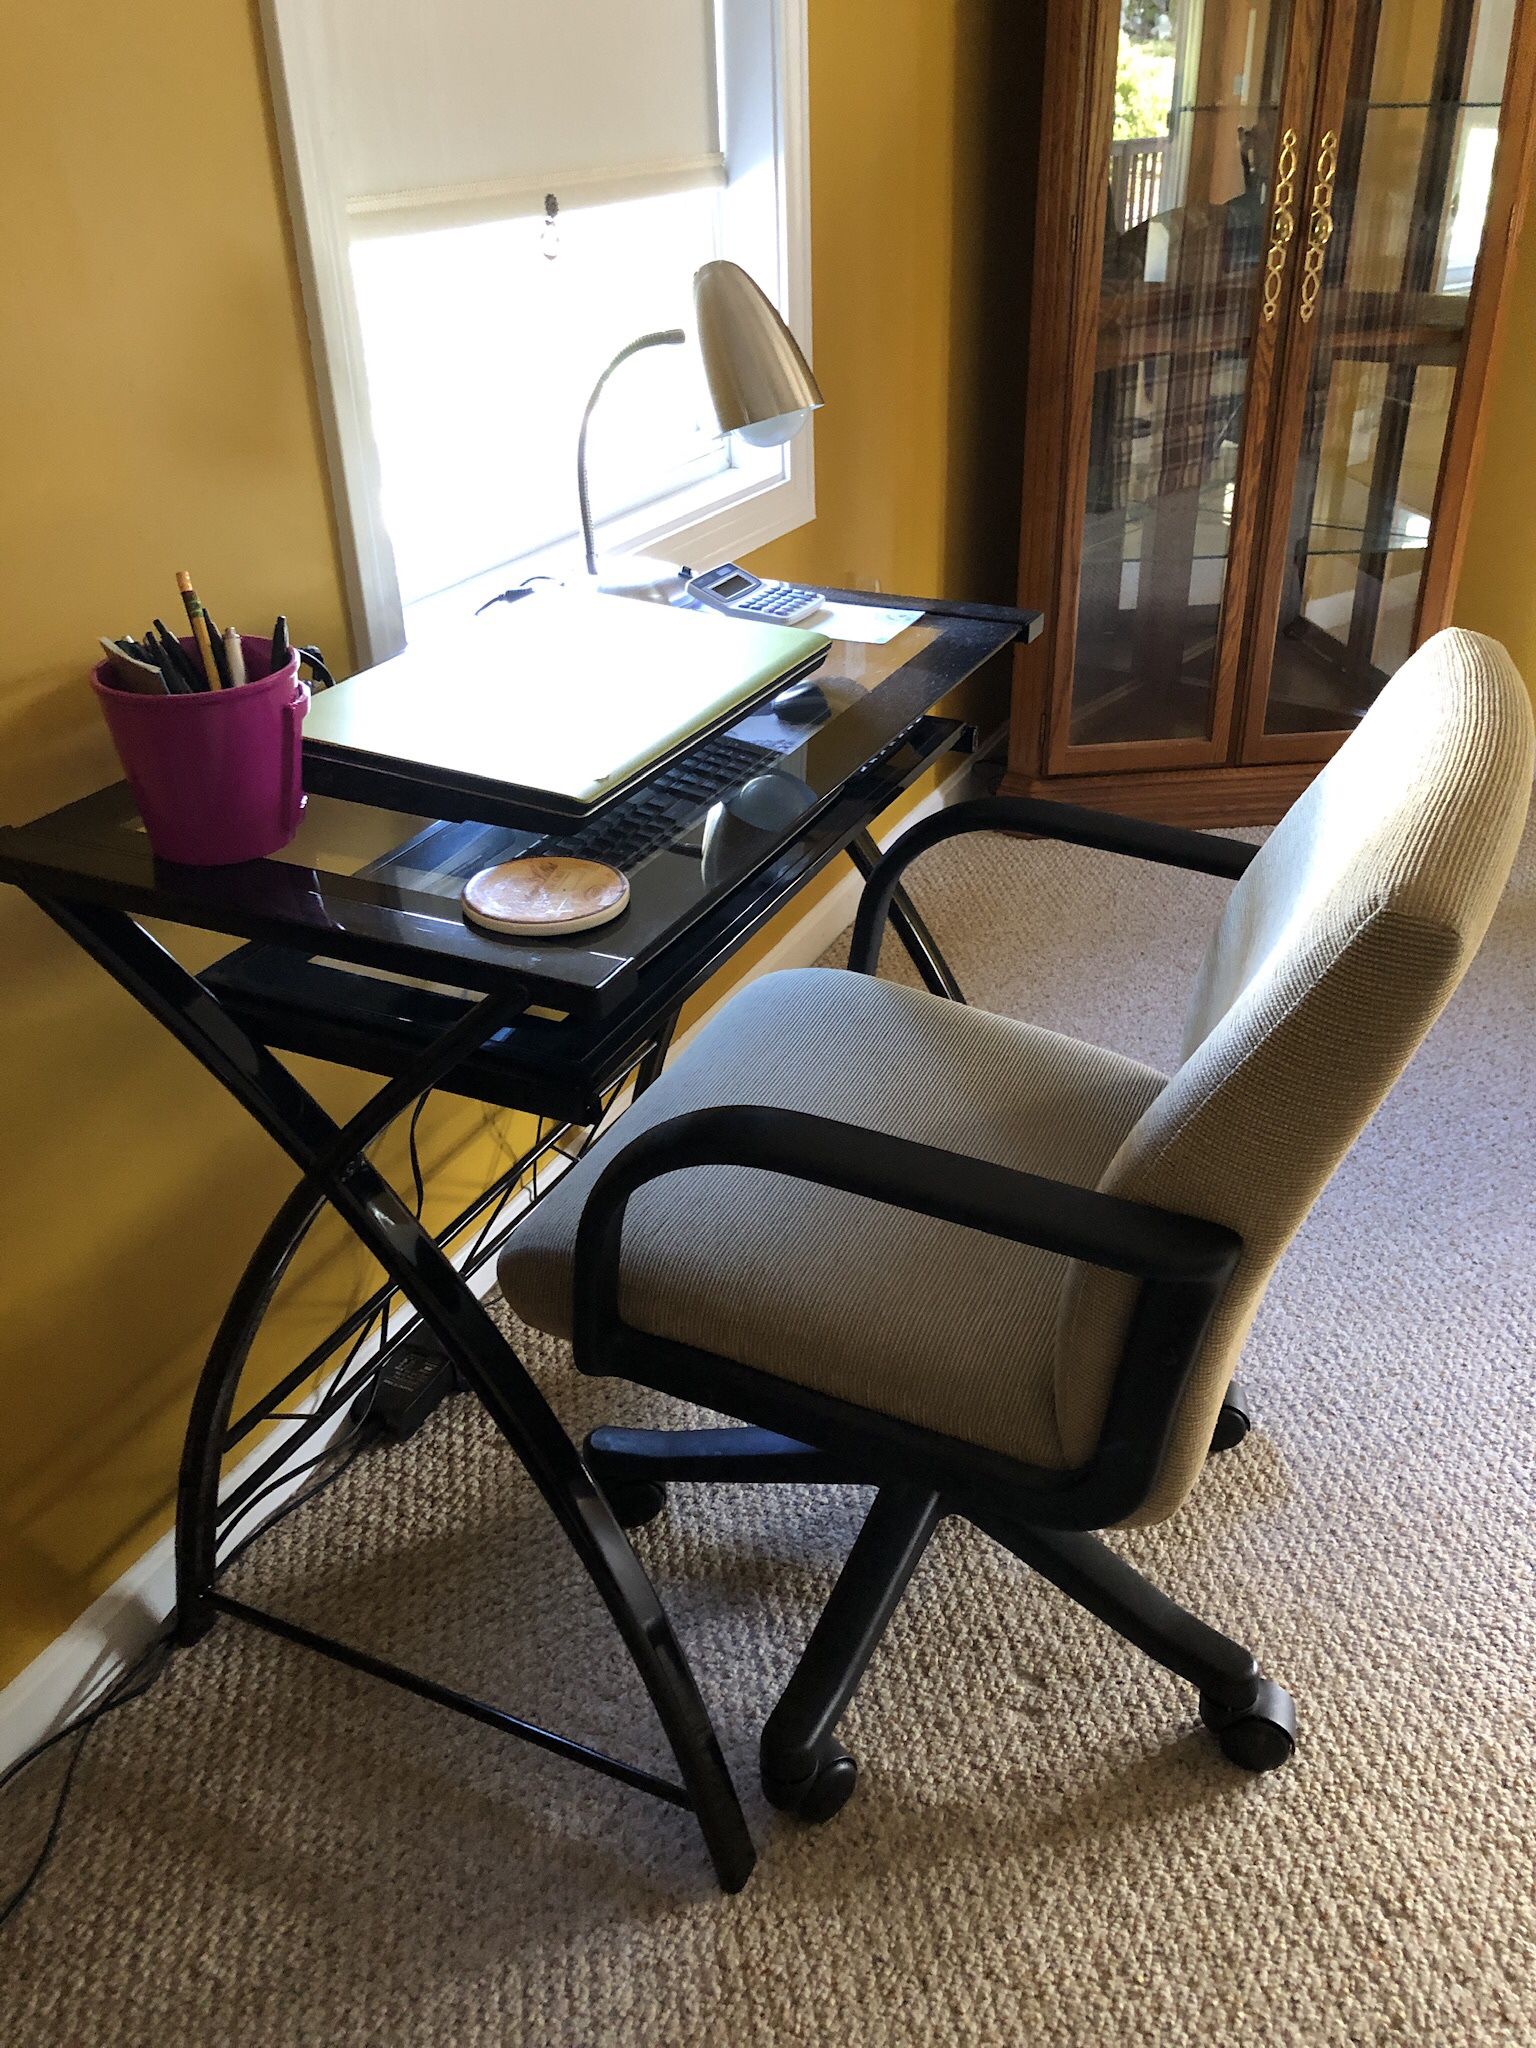 Desk And Chair, Like New, Items On Desk Not Included